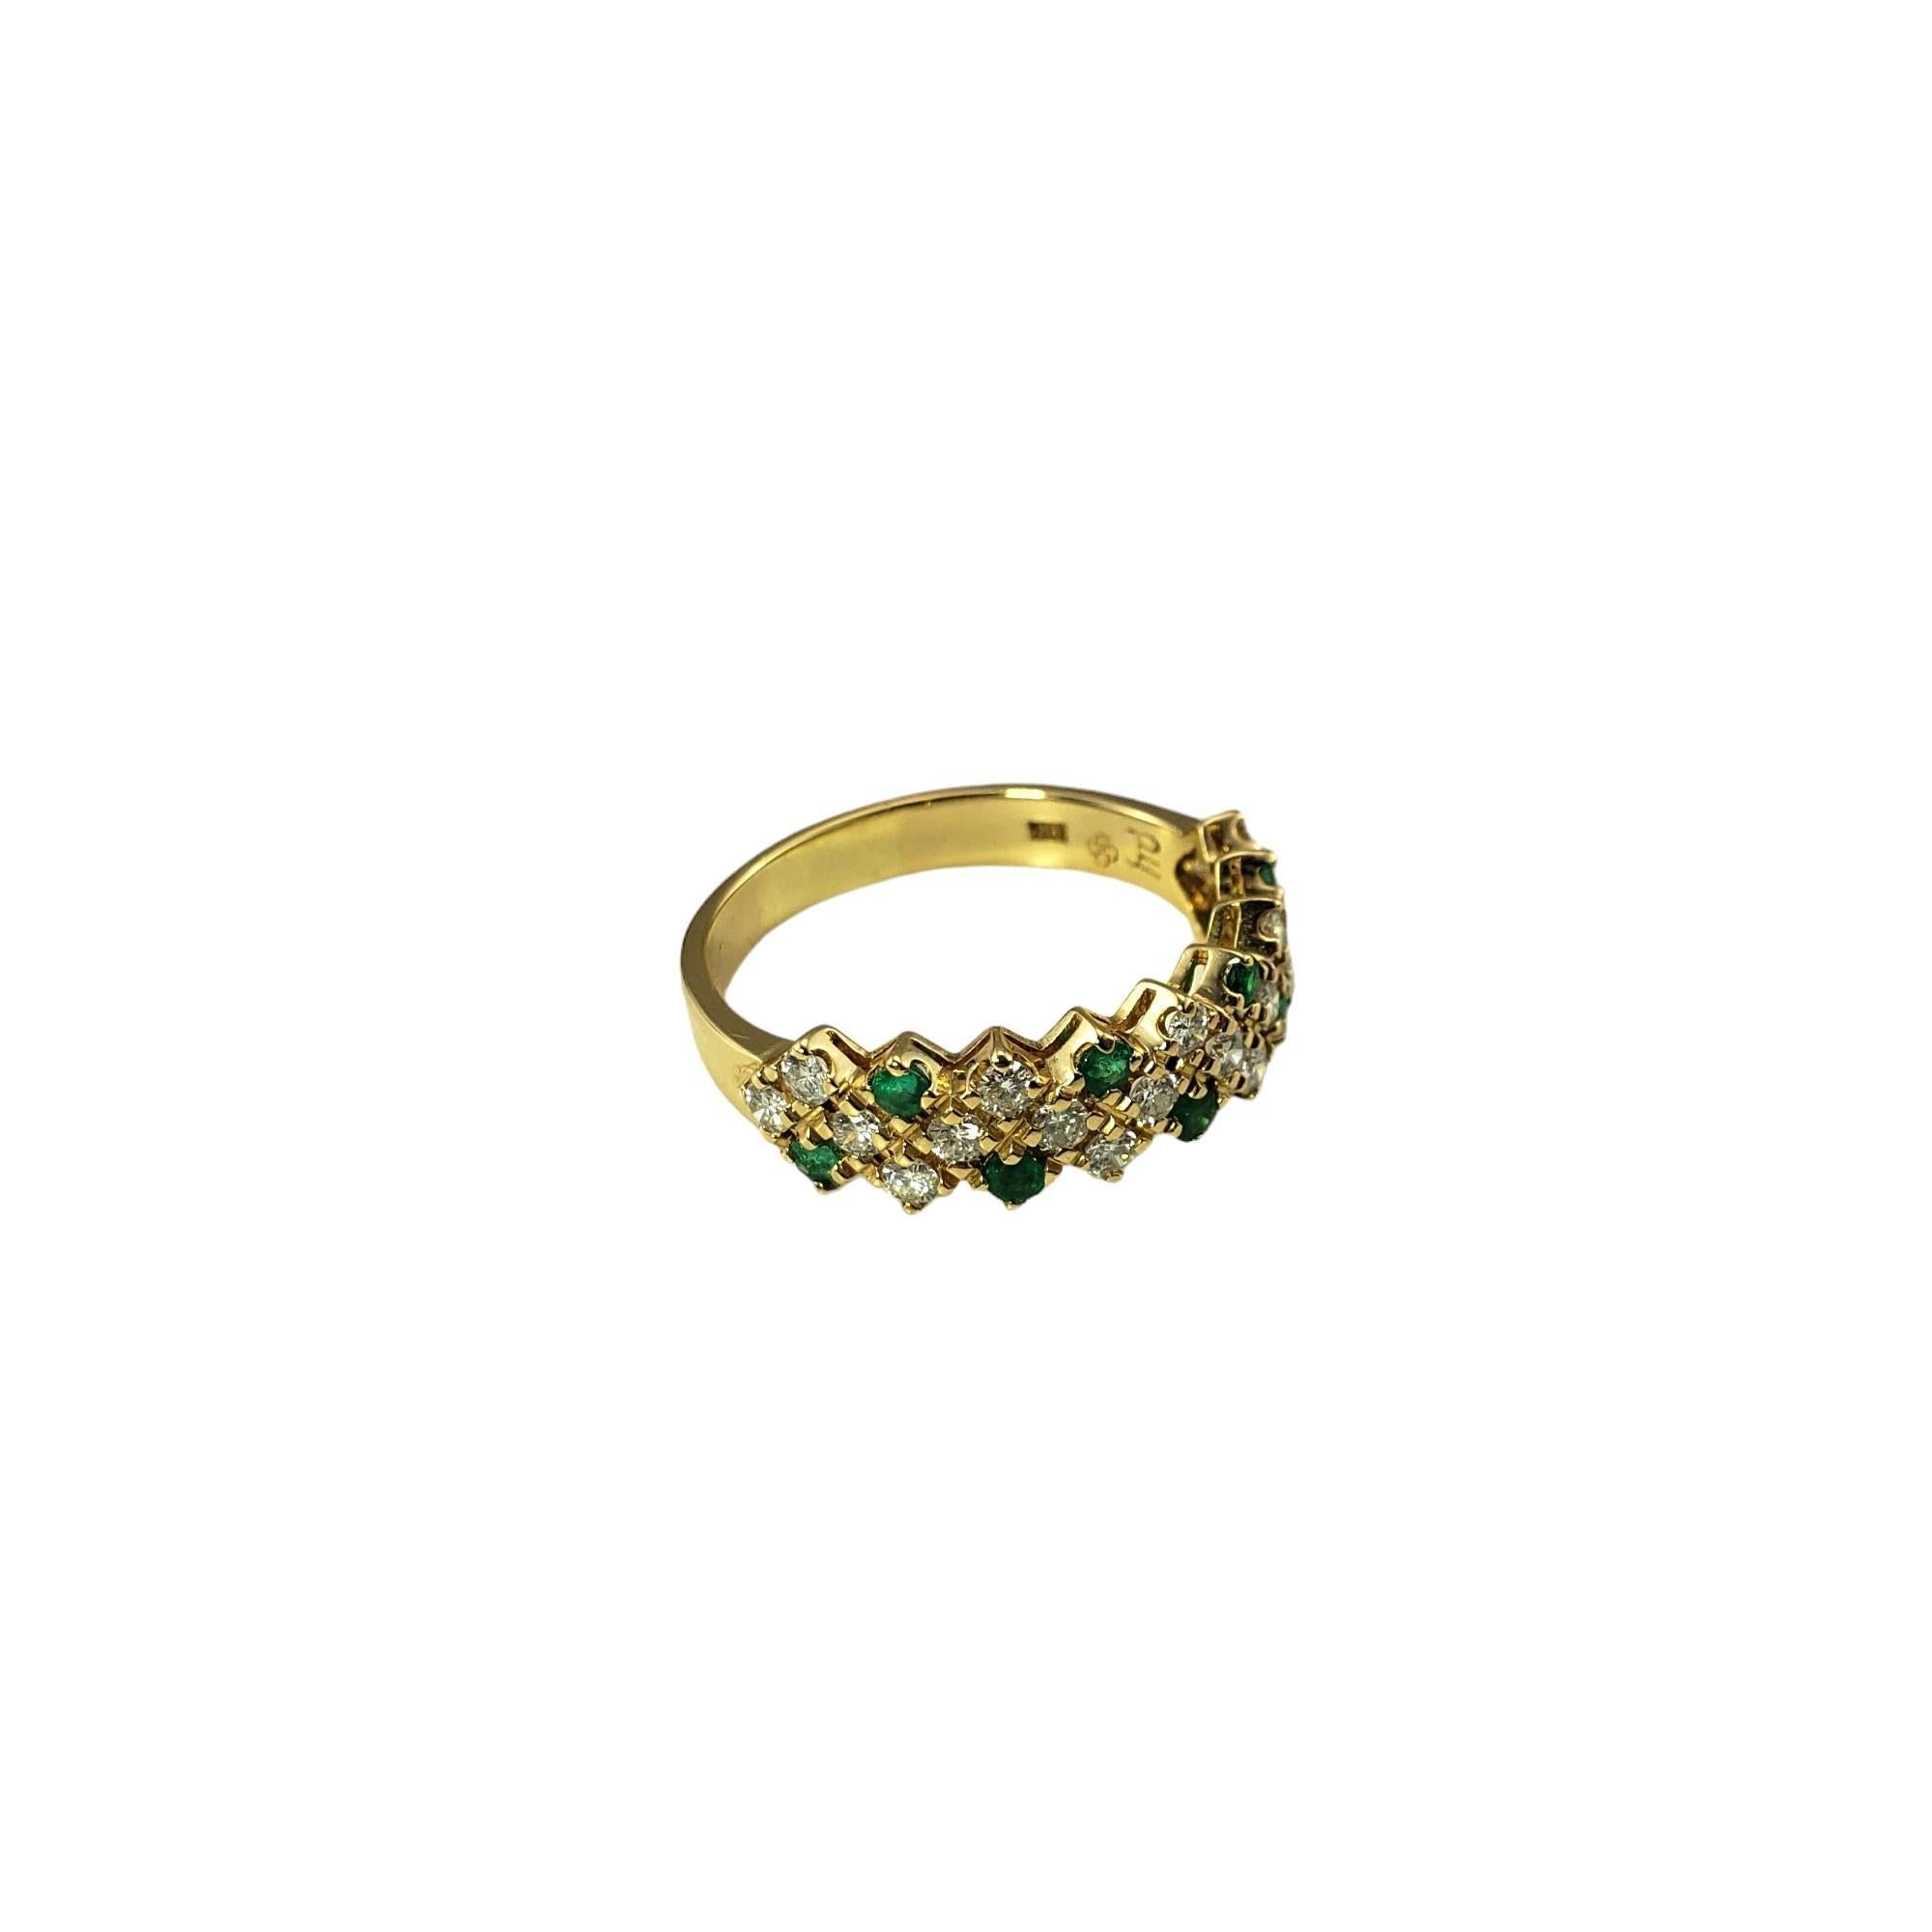 18K Yellow Gold Emerald and Diamond Ring Size 8.75 #16641 In Good Condition For Sale In Washington Depot, CT